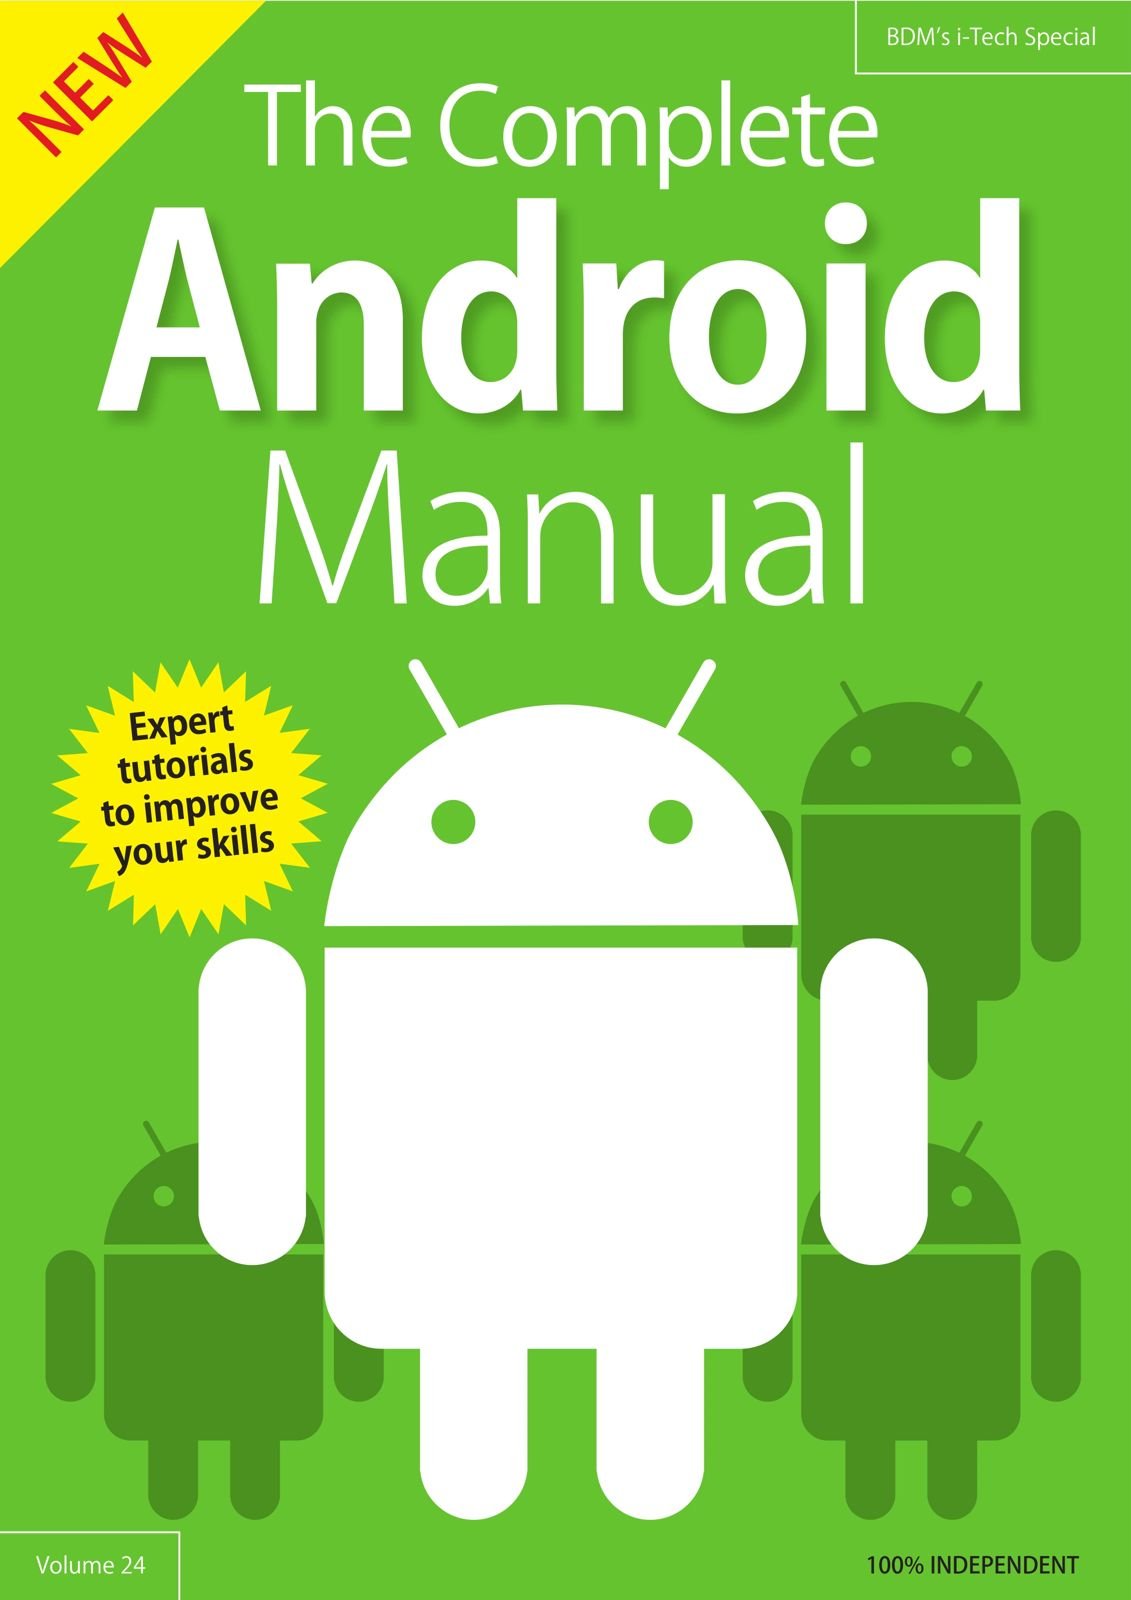 BDM&039;s Series: The Complete Android Manual 2018